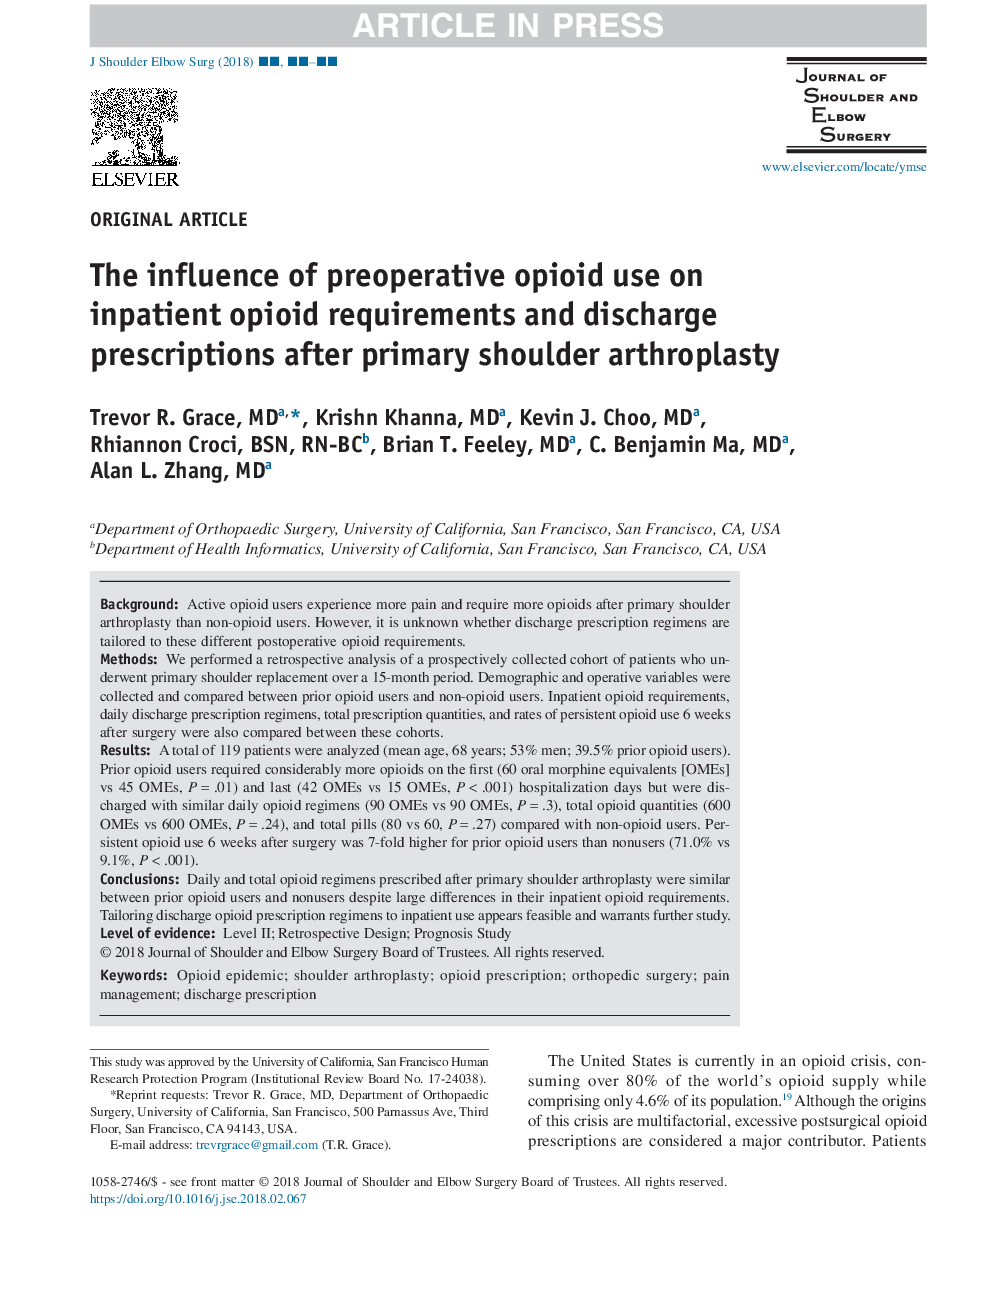 The influence of preoperative opioid use on inpatient opioid requirements and discharge prescriptions after primary shoulder arthroplasty